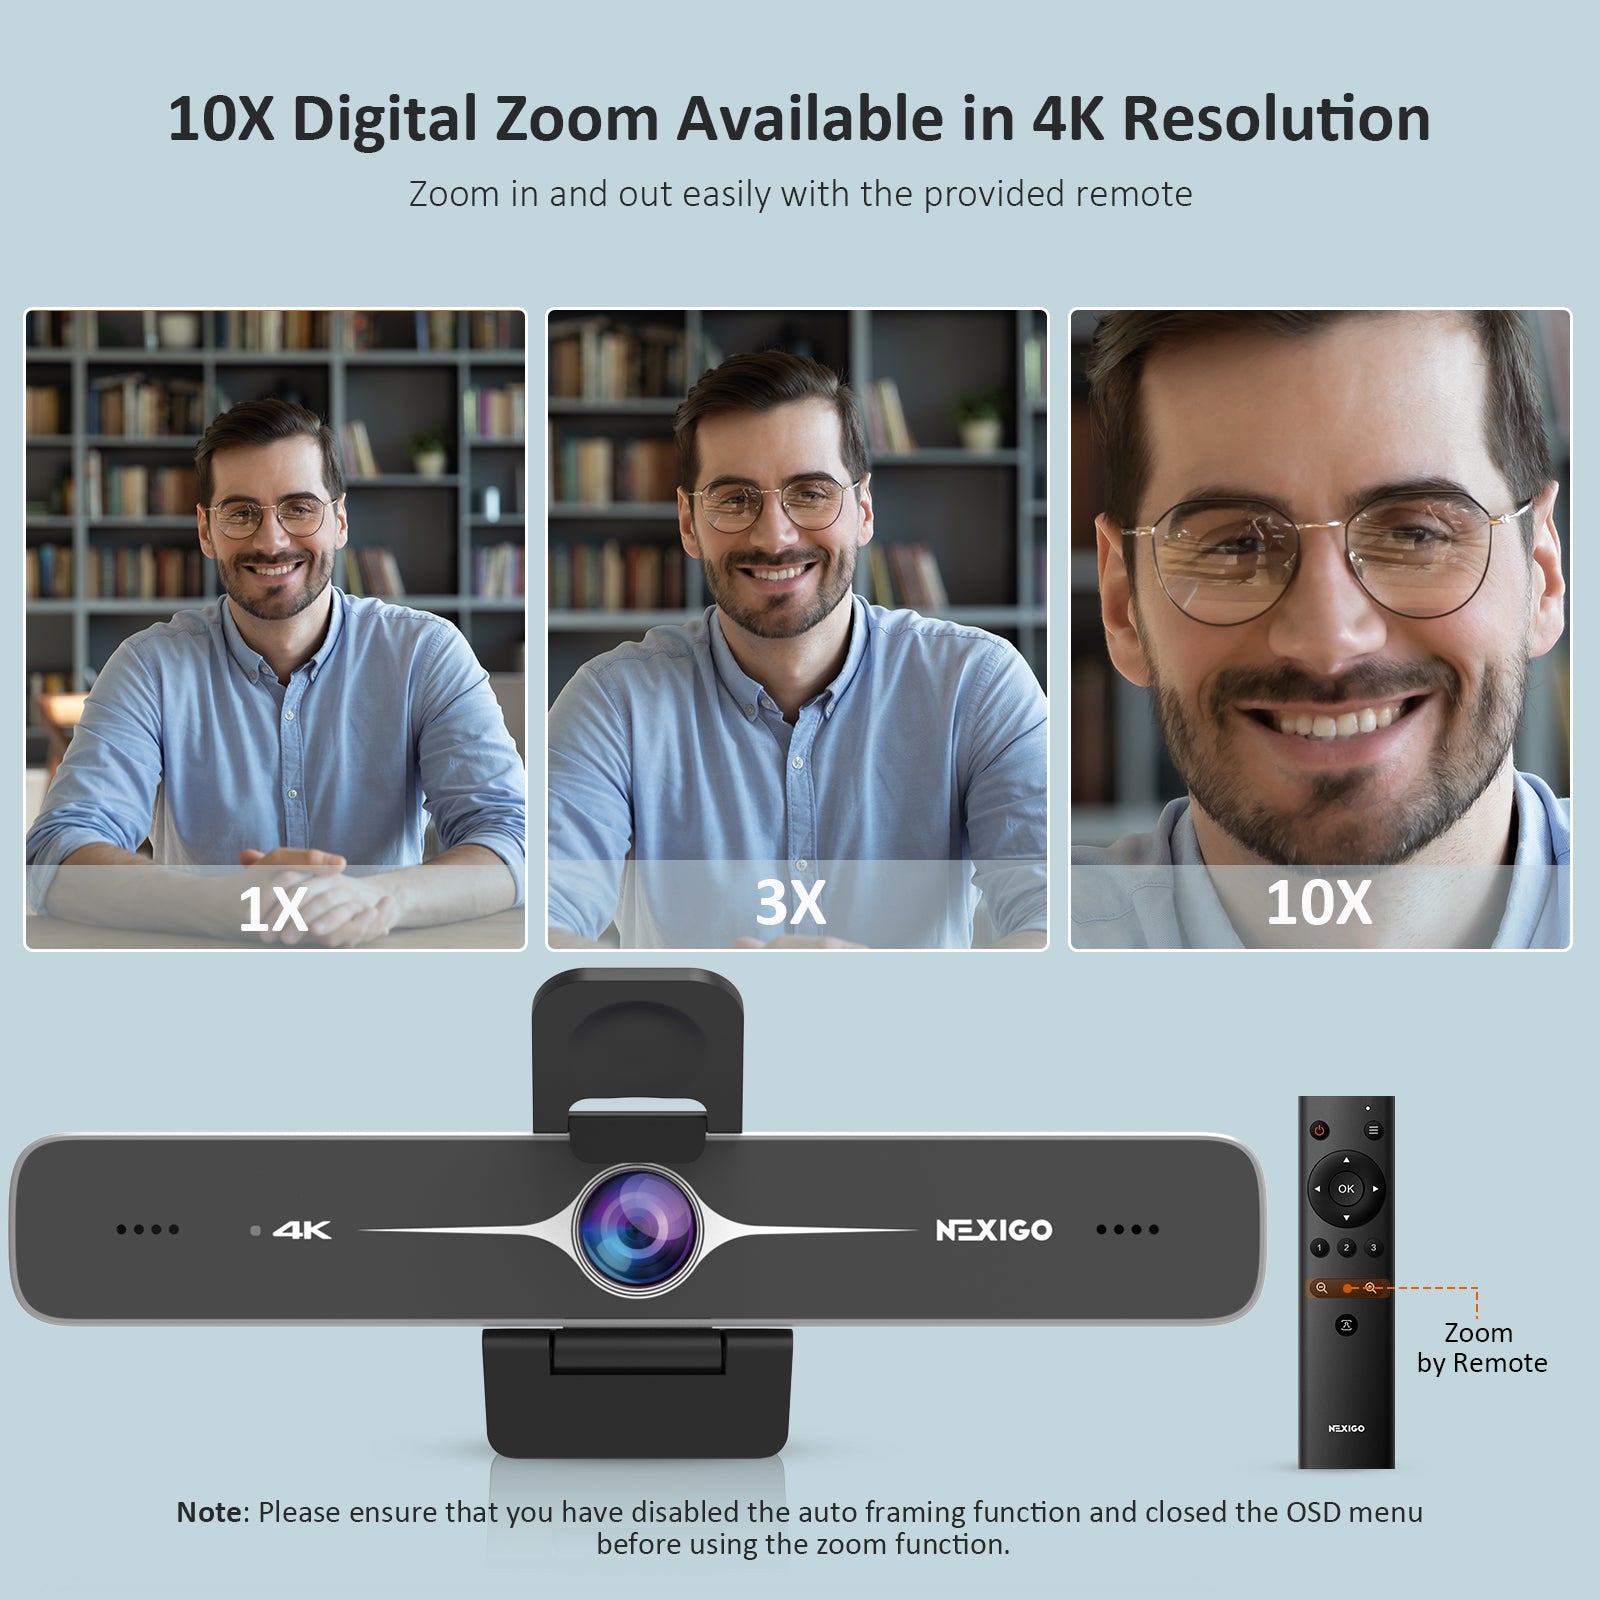 Webcam offers 10x digital zoom with remote control, 4K Resolution.